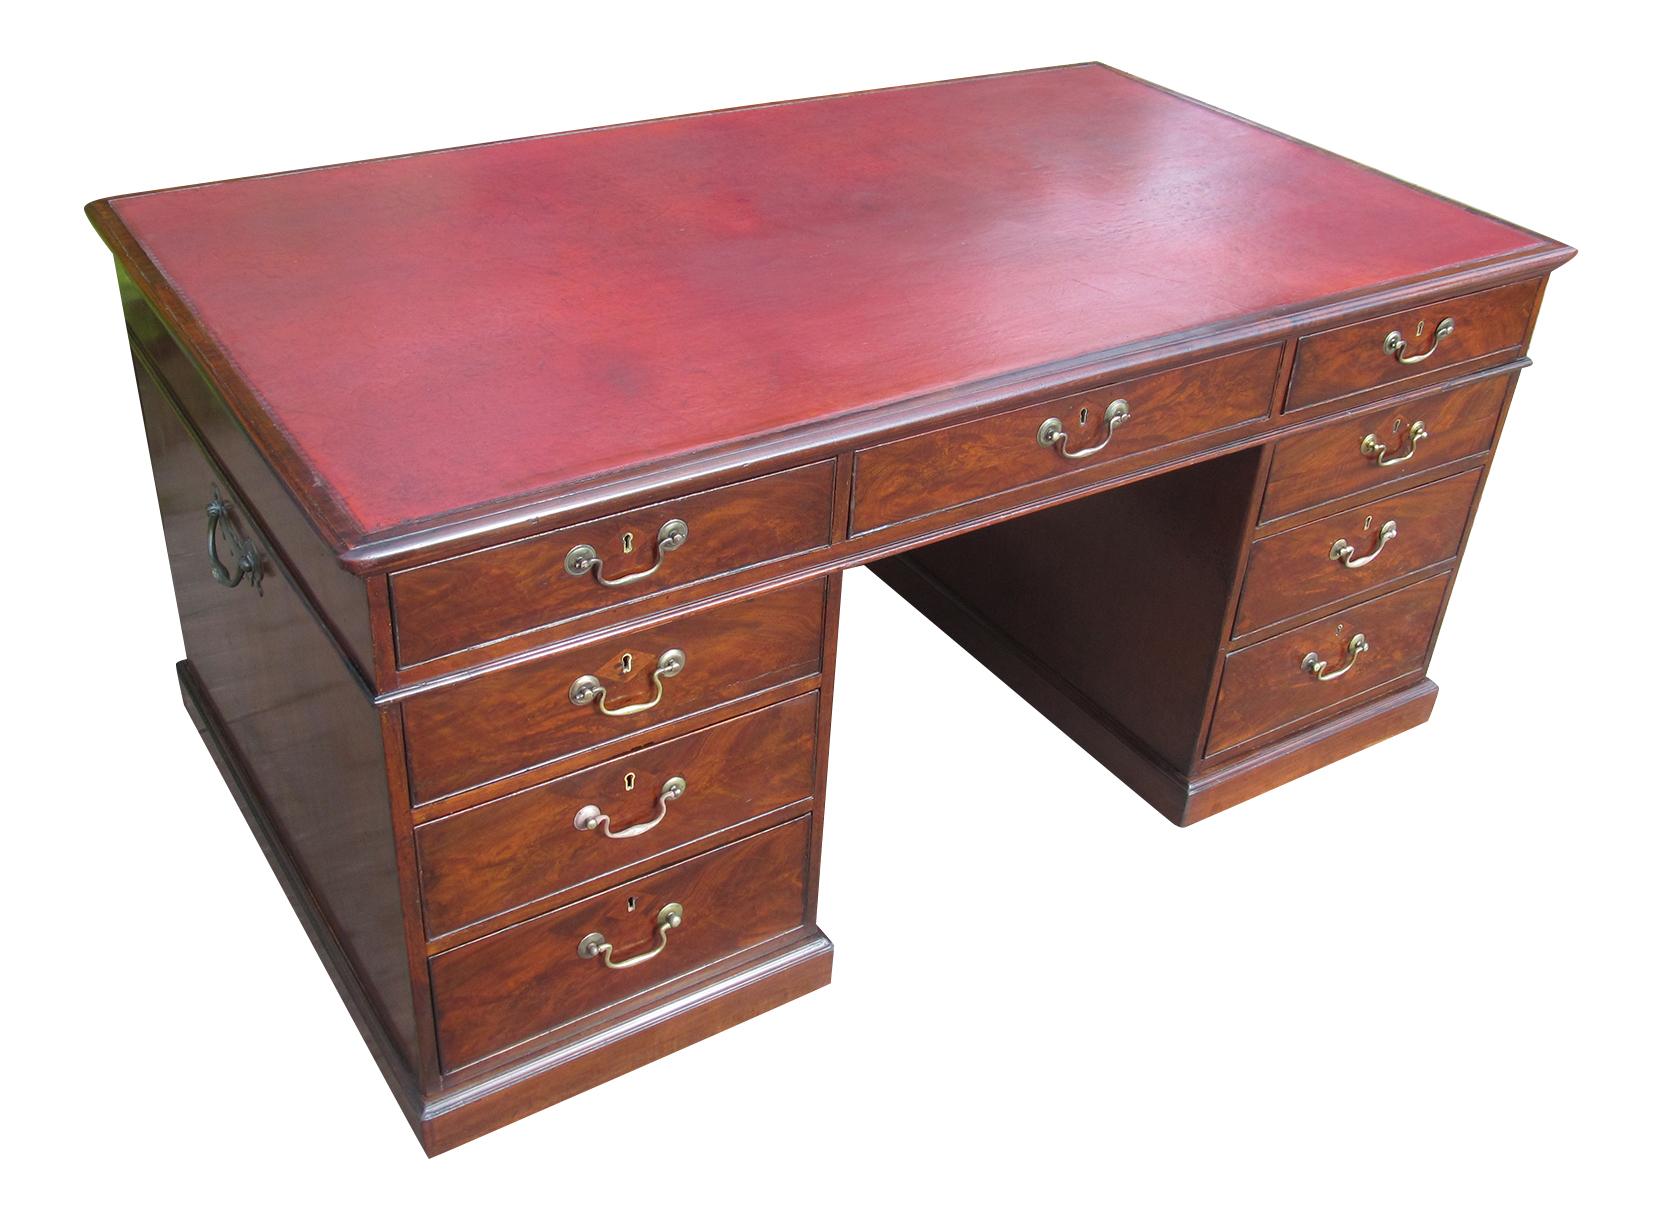 This desk not only has many features of an original Chippendale desk for example 3 roller casters to plinths, but was removed from the war office London and may have come from the war rooms themselves where Winston Churchill smoked many a cigar! The